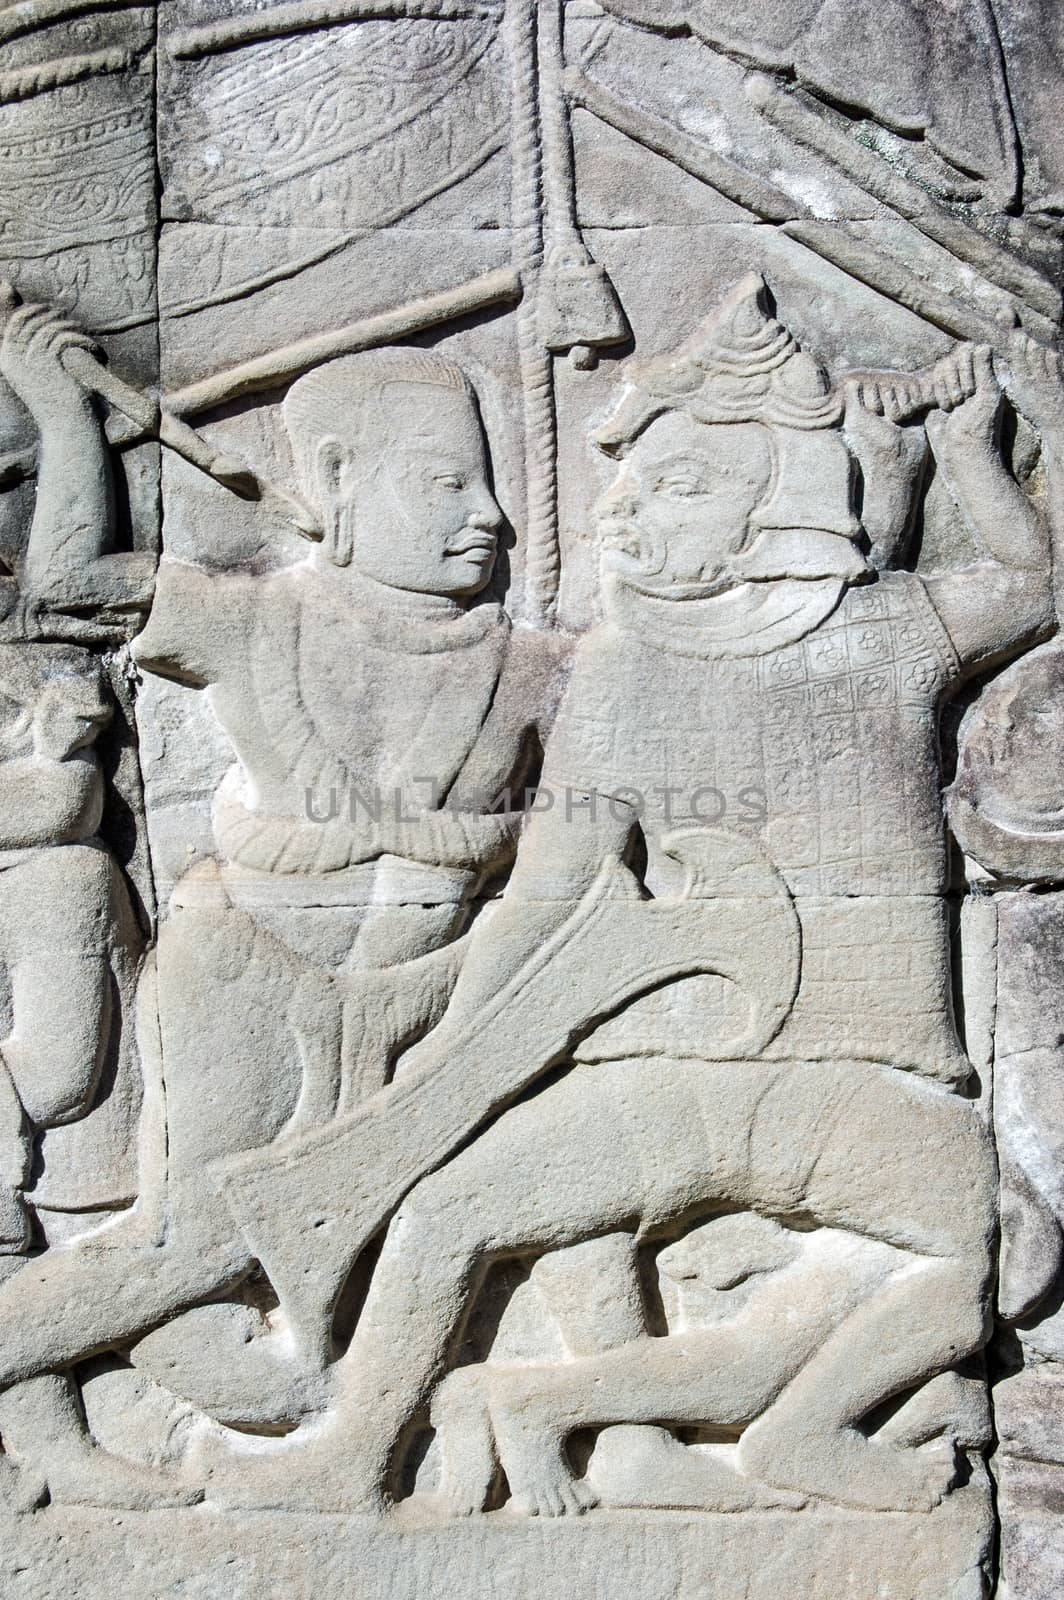 Ancient Khmer and Cham soldiers fighting, Cambodia by BasPhoto